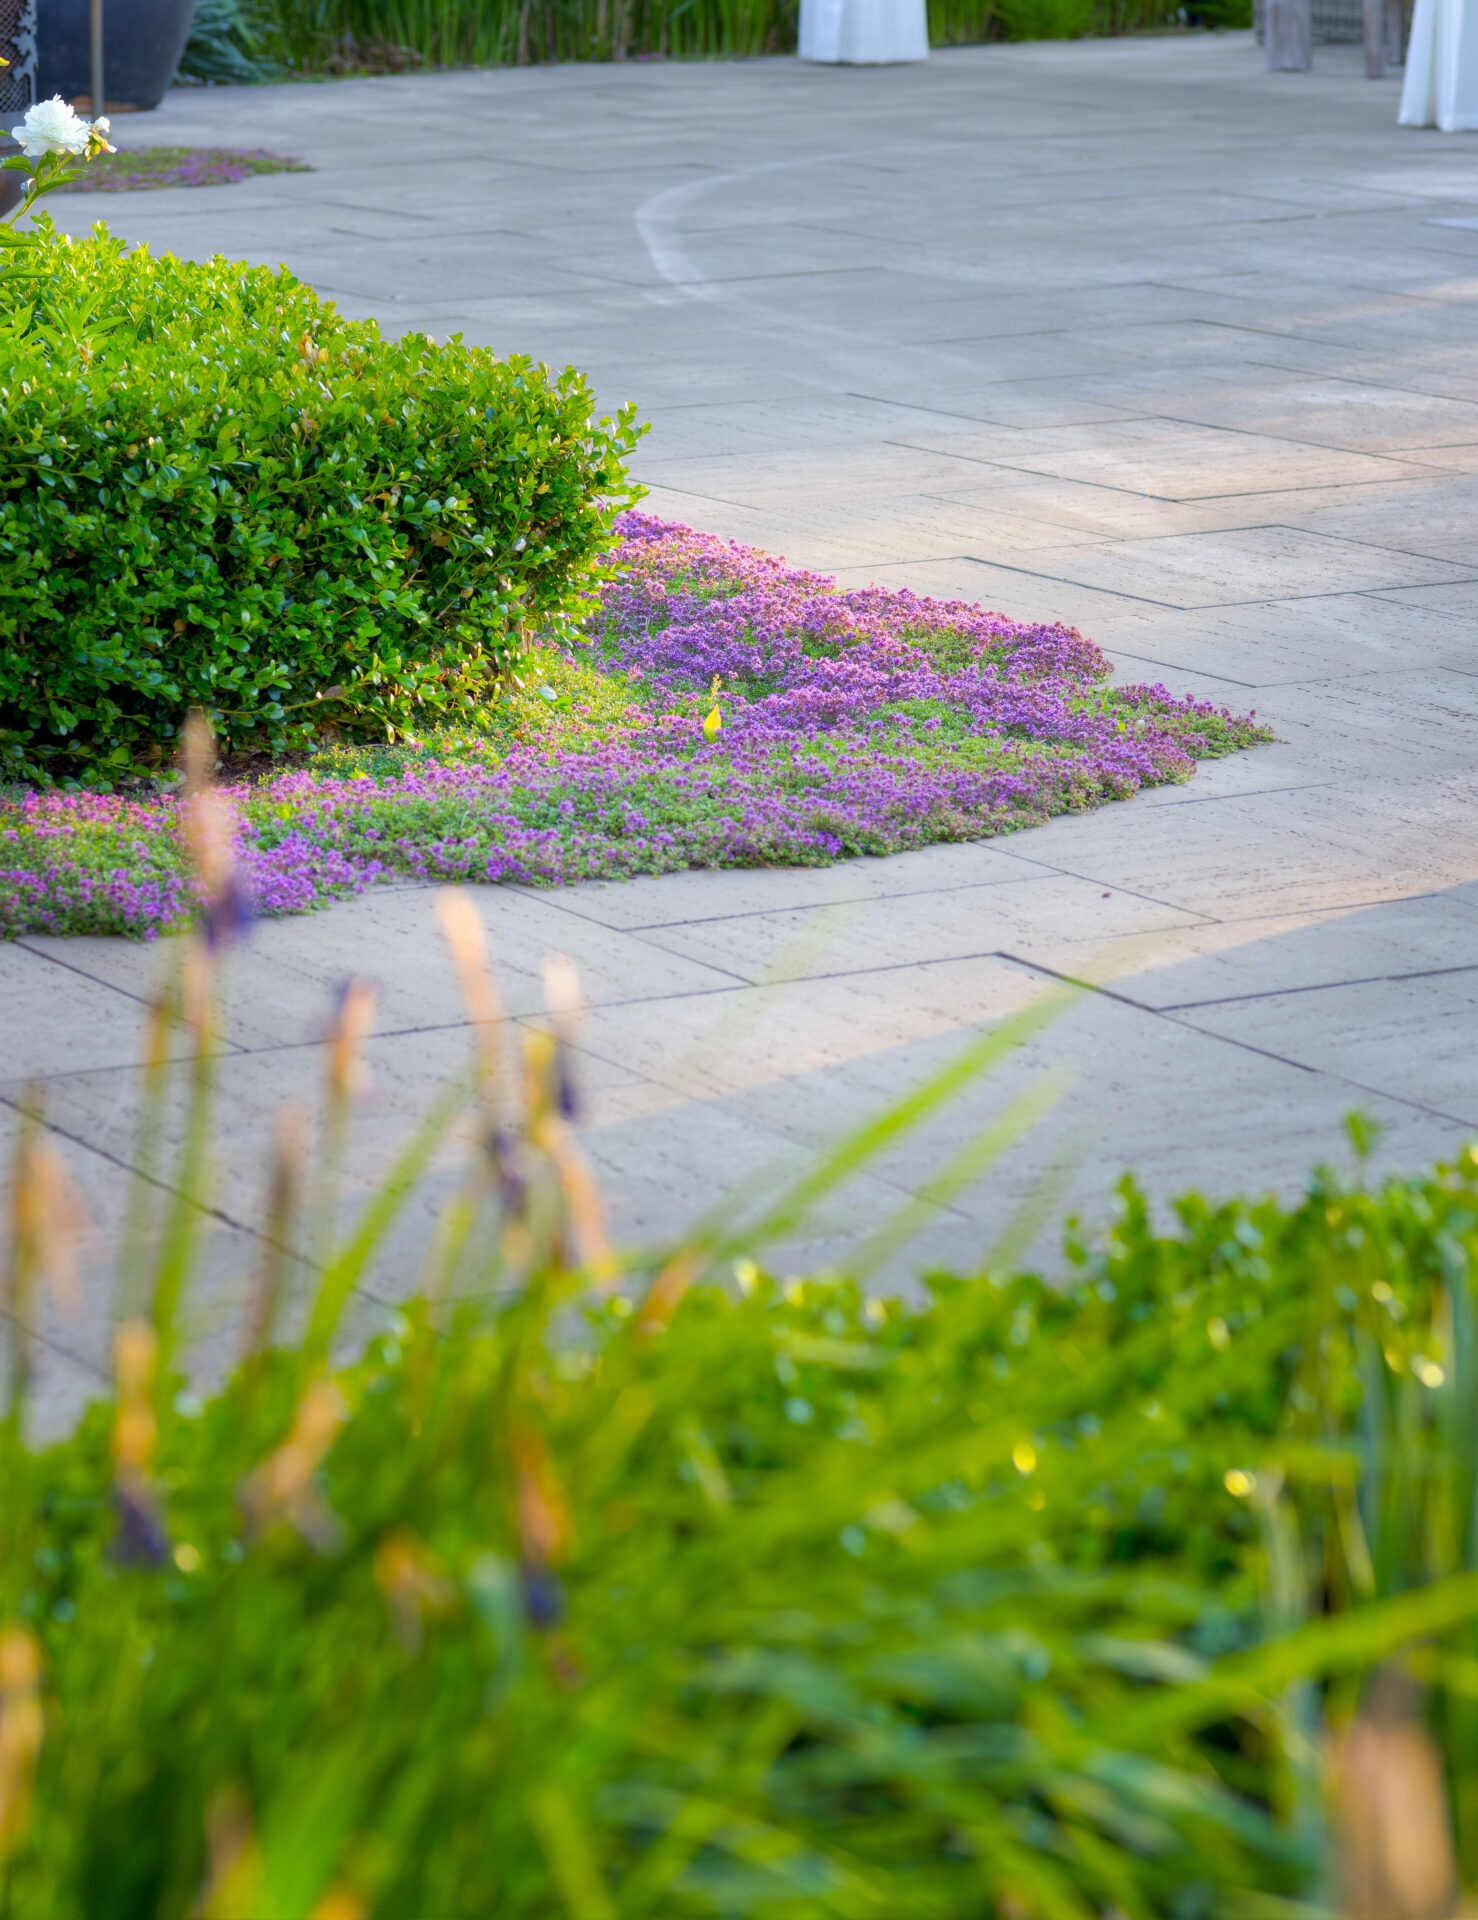 A paved pathway is surrounded by lush greenery and vibrant purple groundcover. The focus is on the well-maintained landscaping with no people visible.